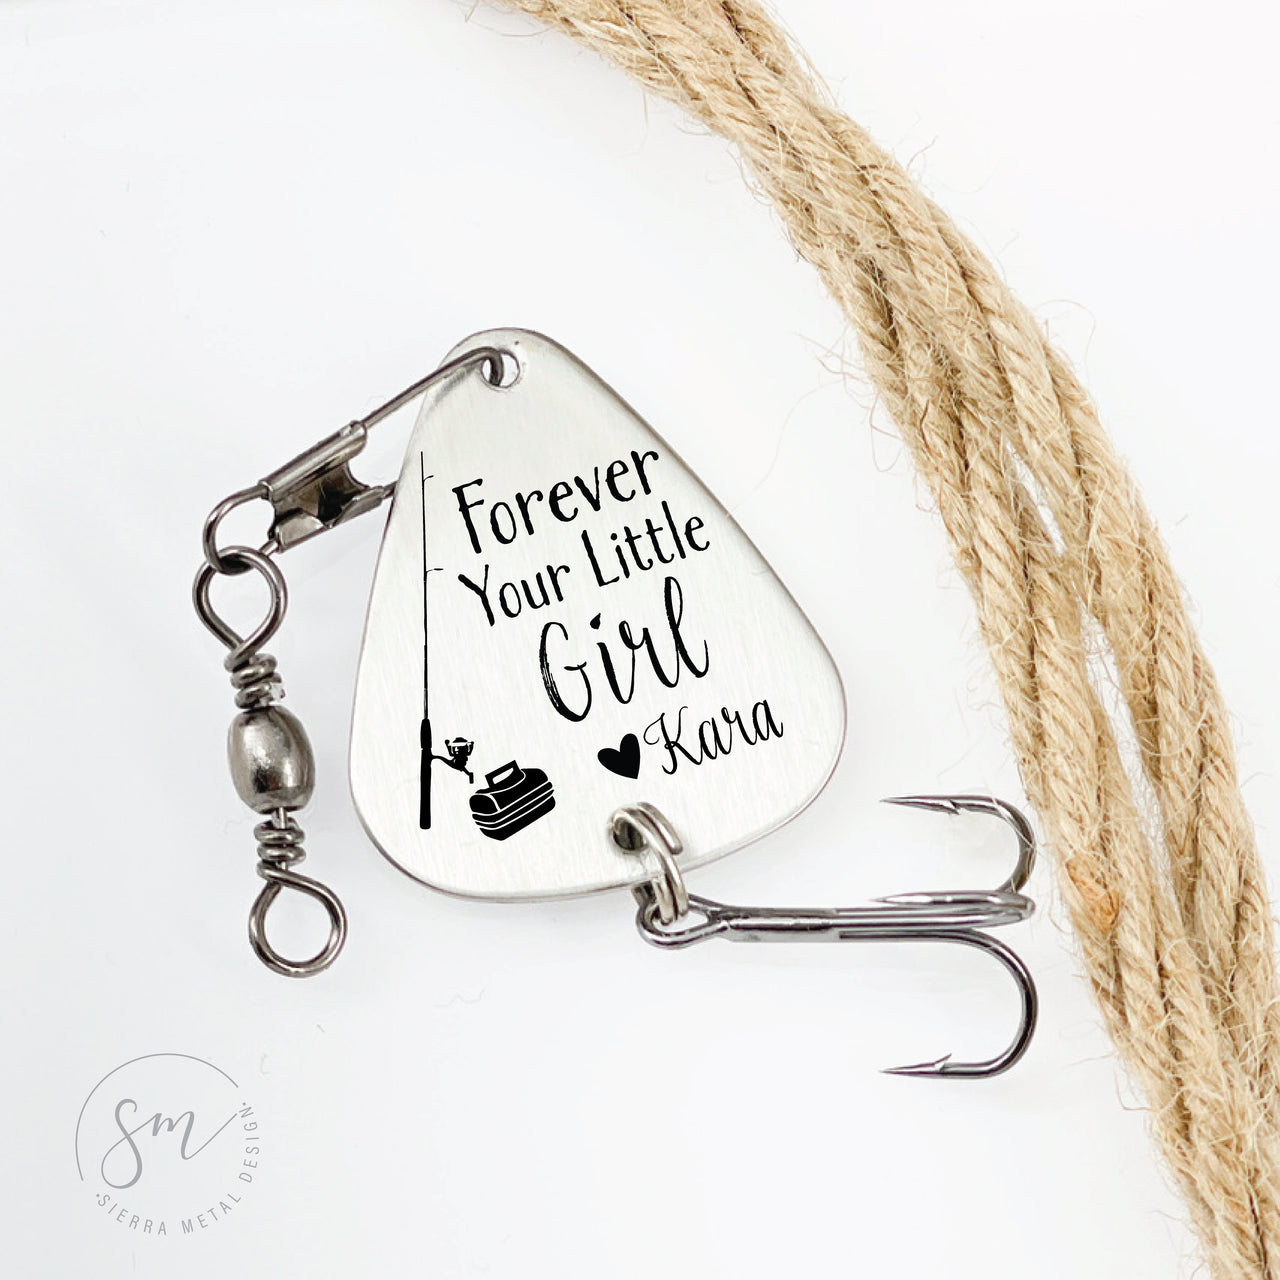 Forever Your Little Girl Fishing Lure